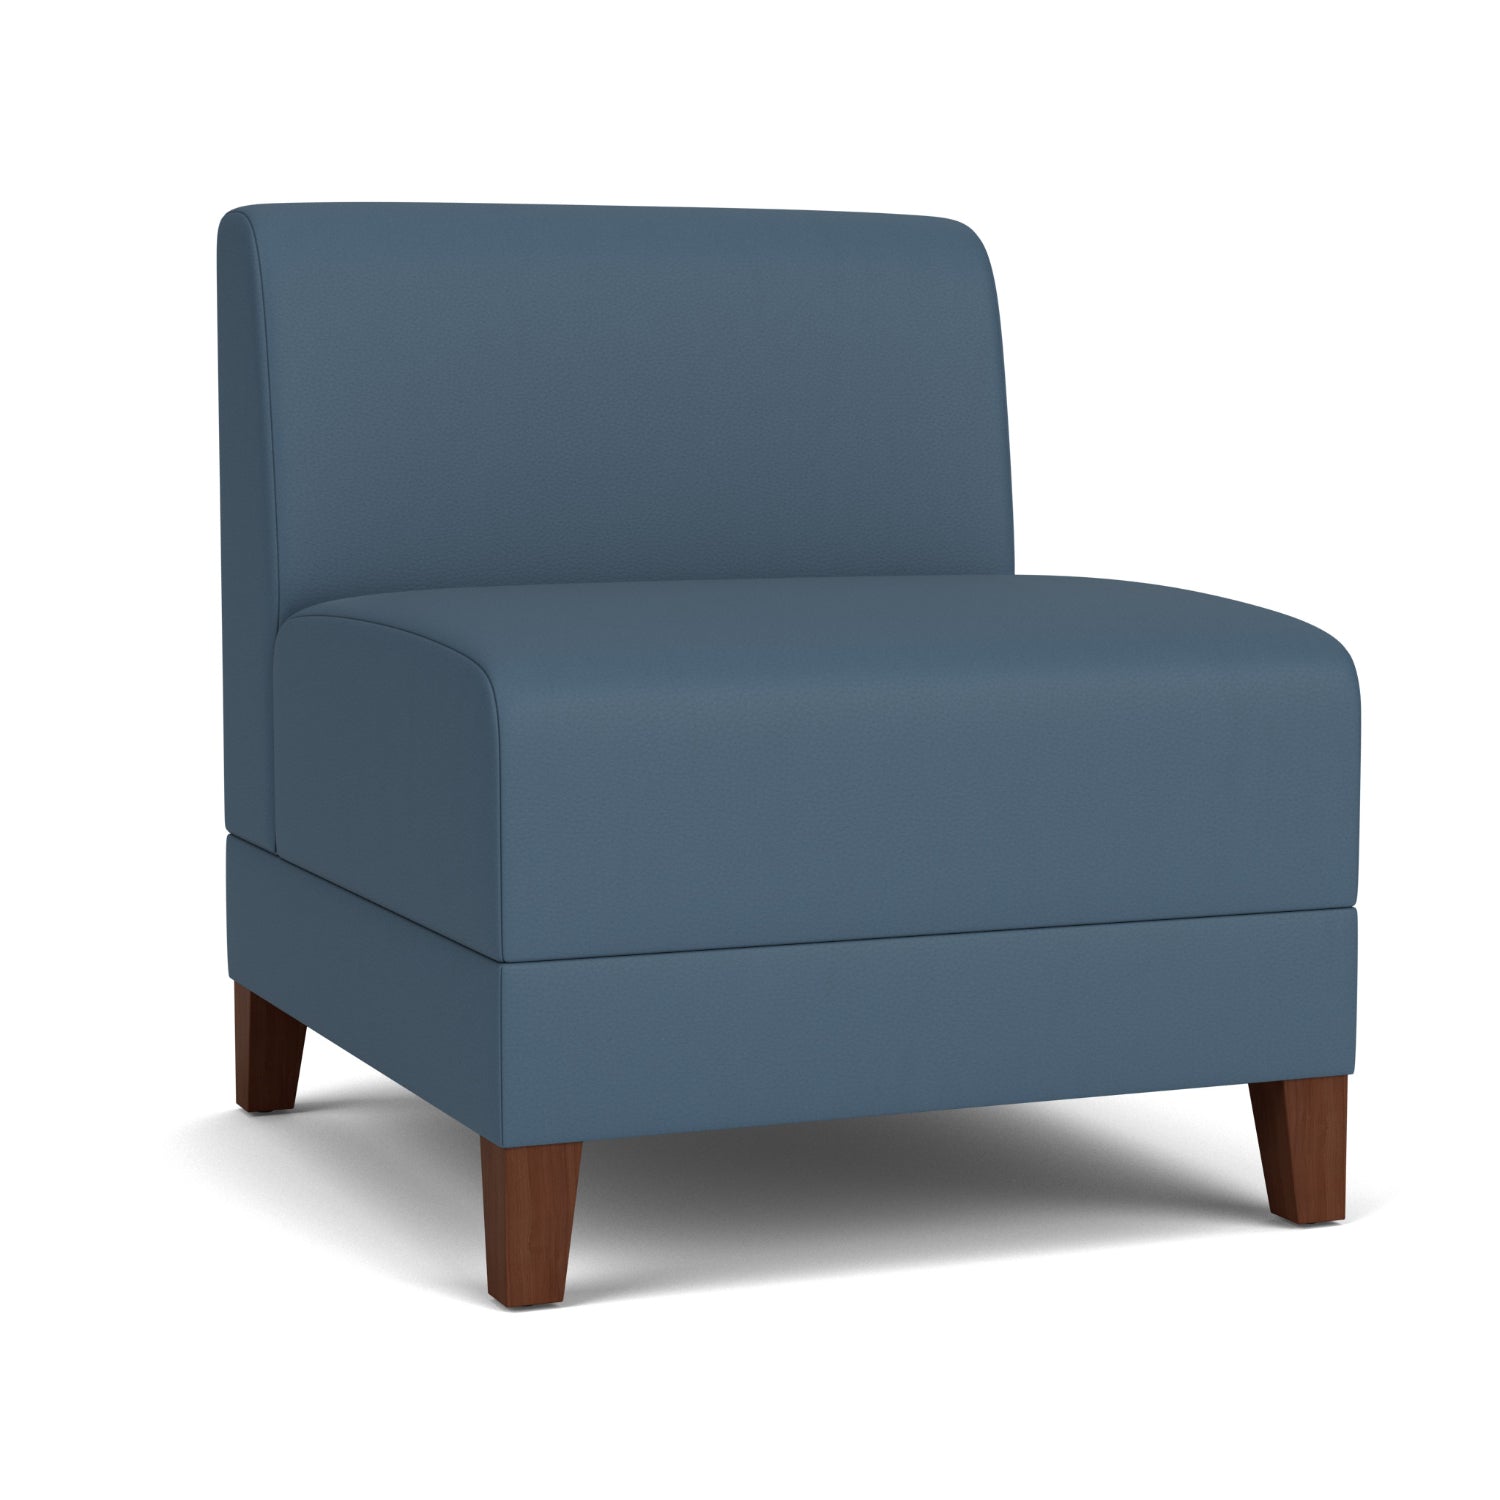 Fremont Collection Reception Seating, Armless Guest Chair, Standard Vinyl Upholstery, FREE SHIPPING